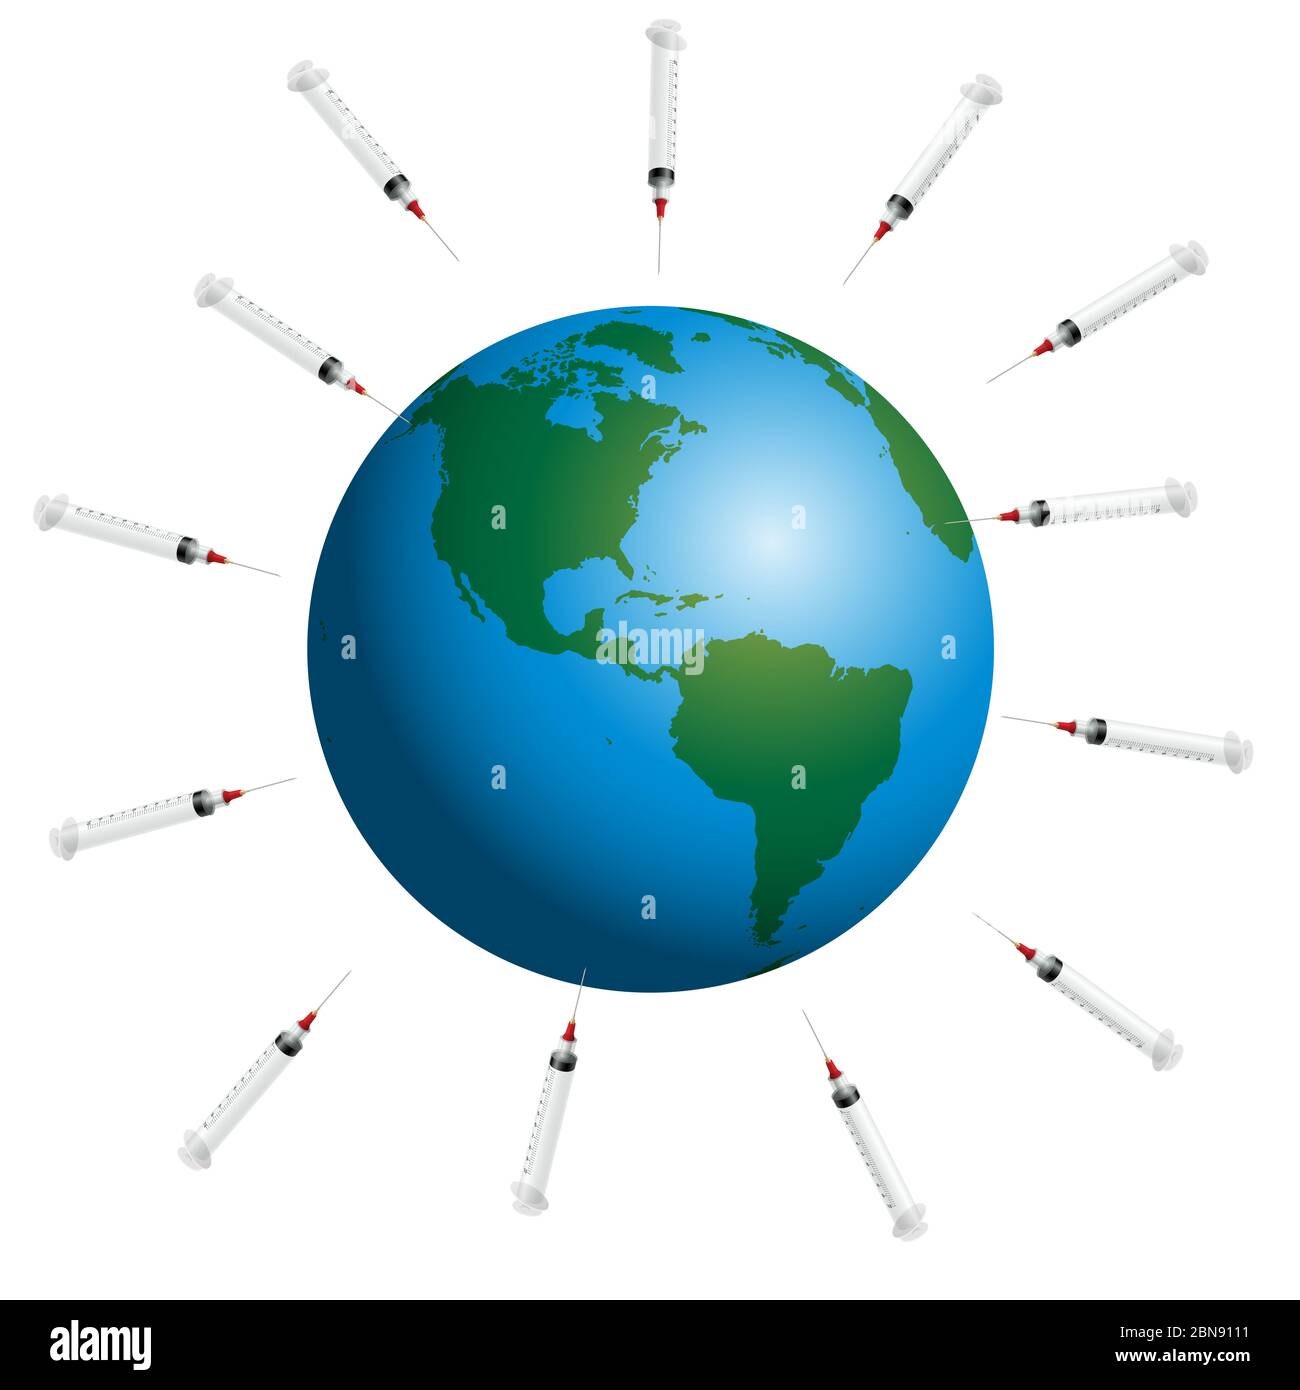 Syringes around planet earth. Symbol for mass vaccination and global immunization campaign of big pharma. Stock Photo